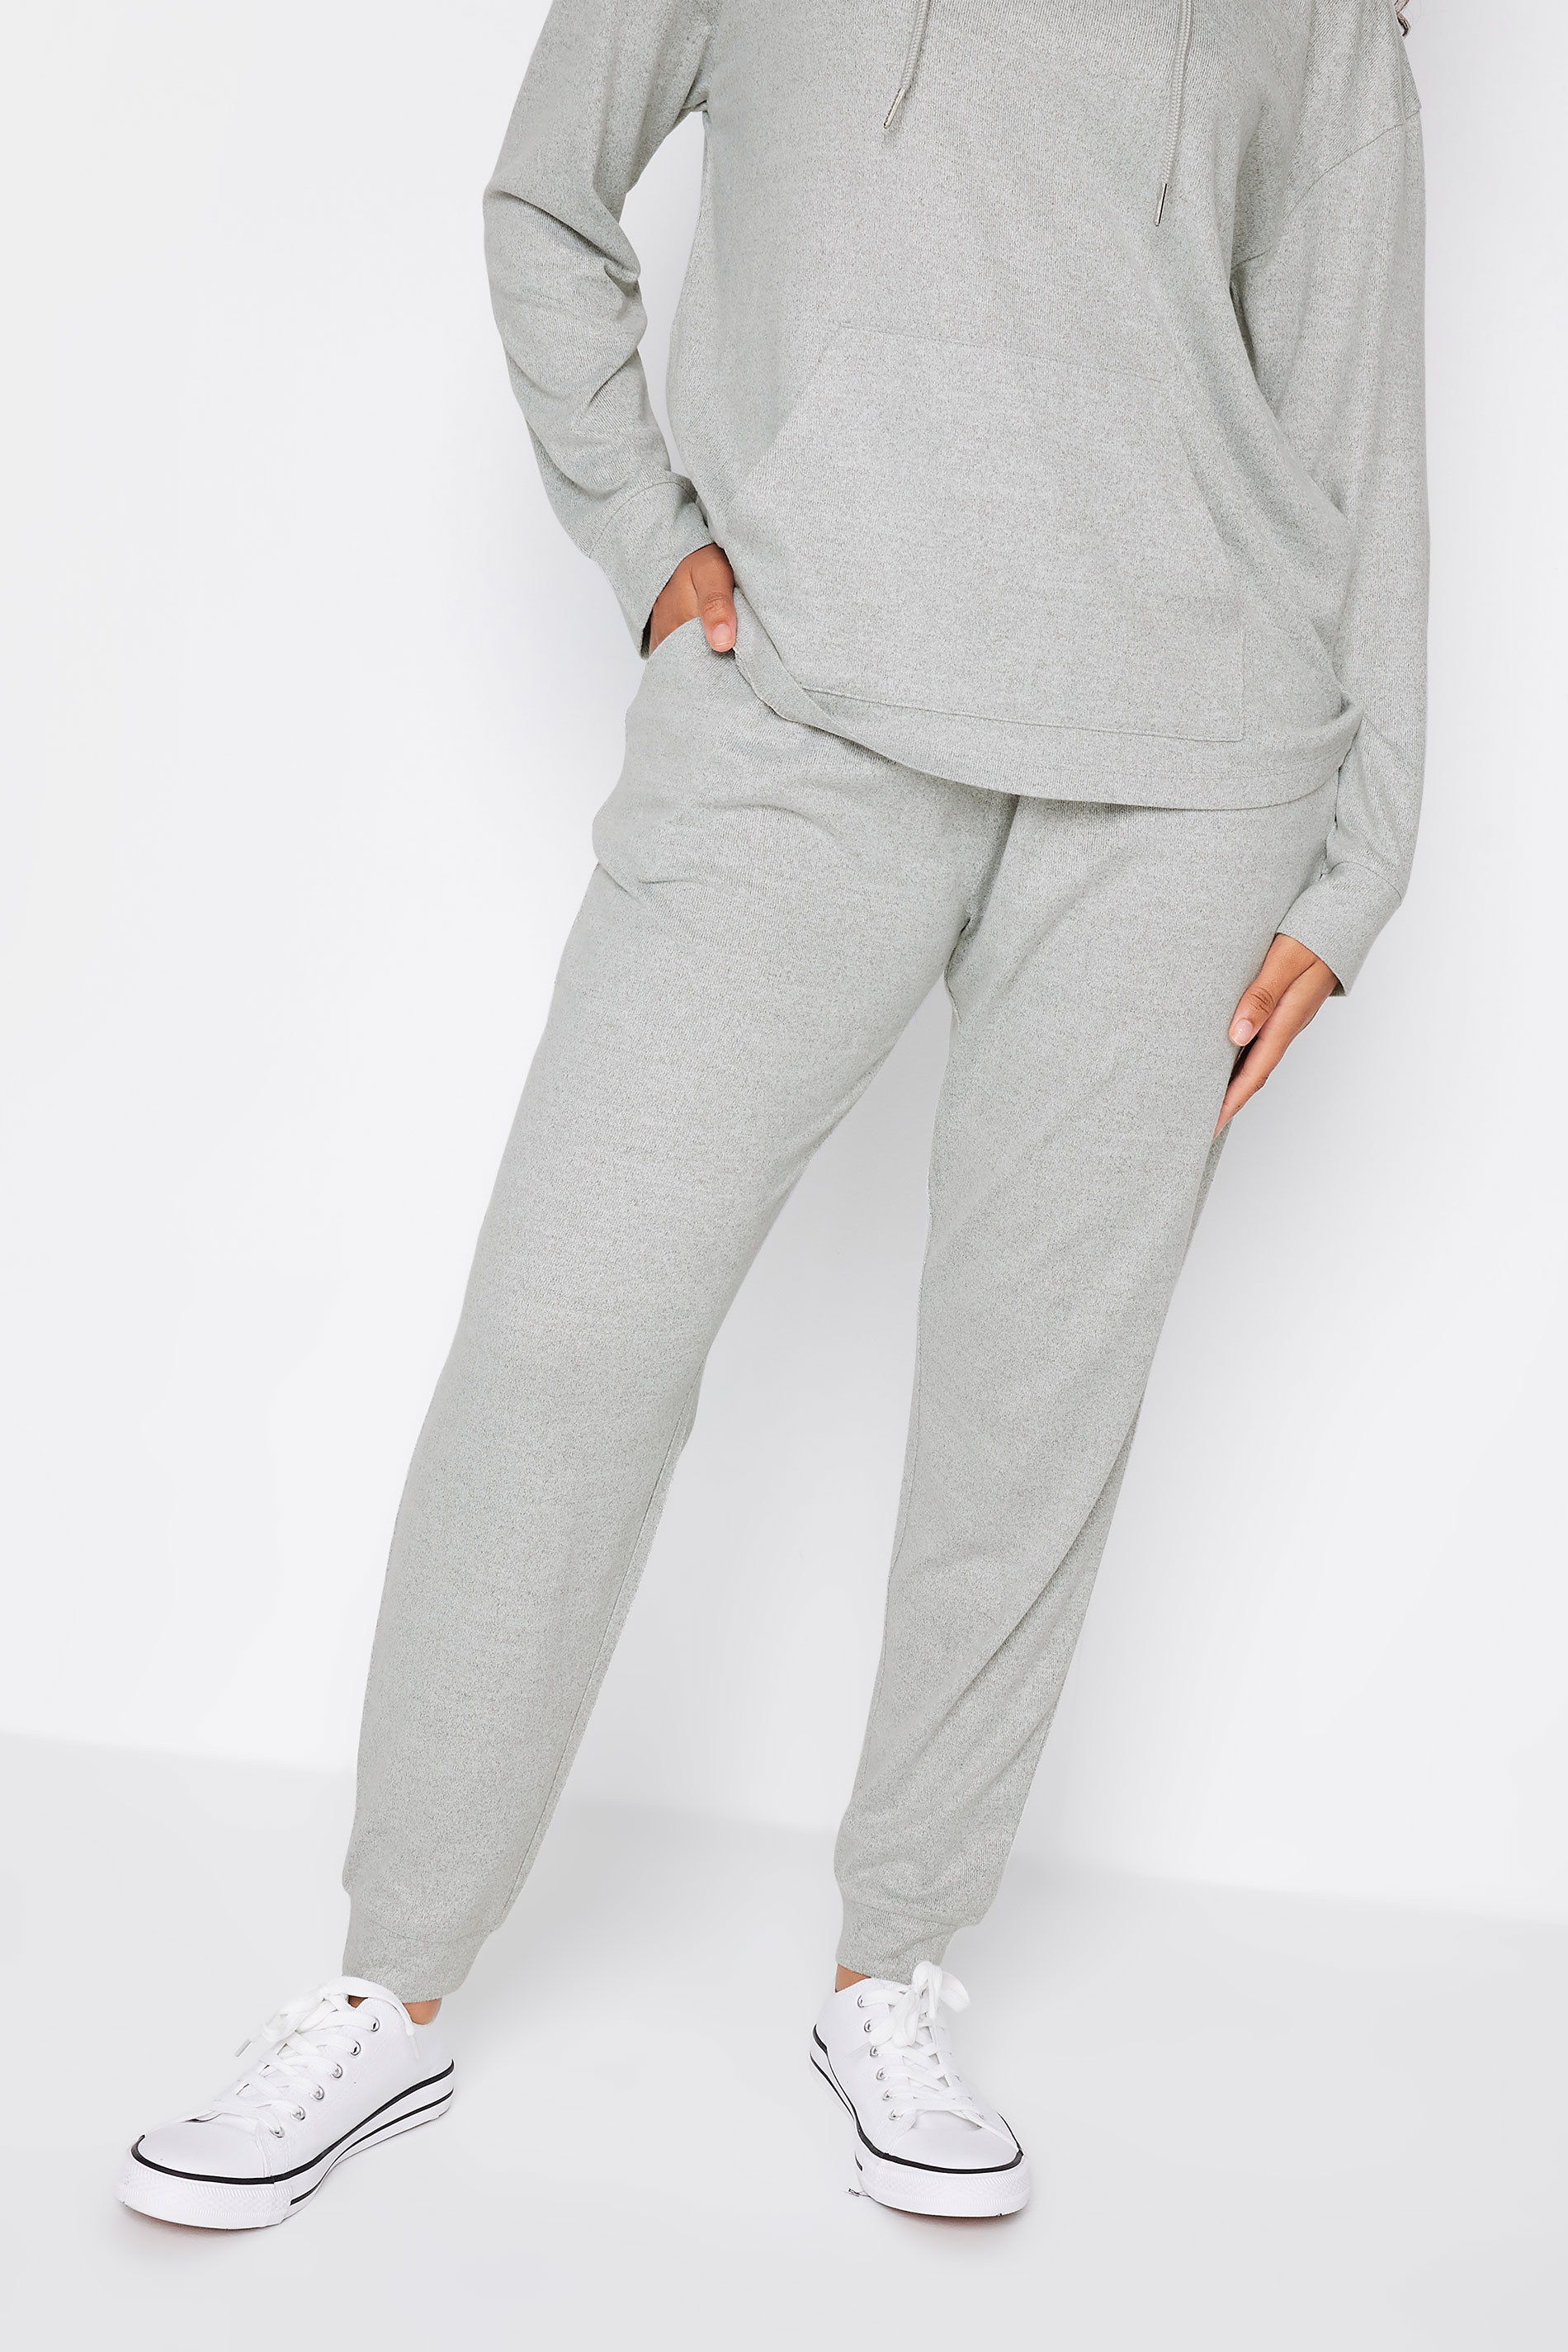 M&Co Grey Marl Soft Touch Lounge Joggers | M&Co